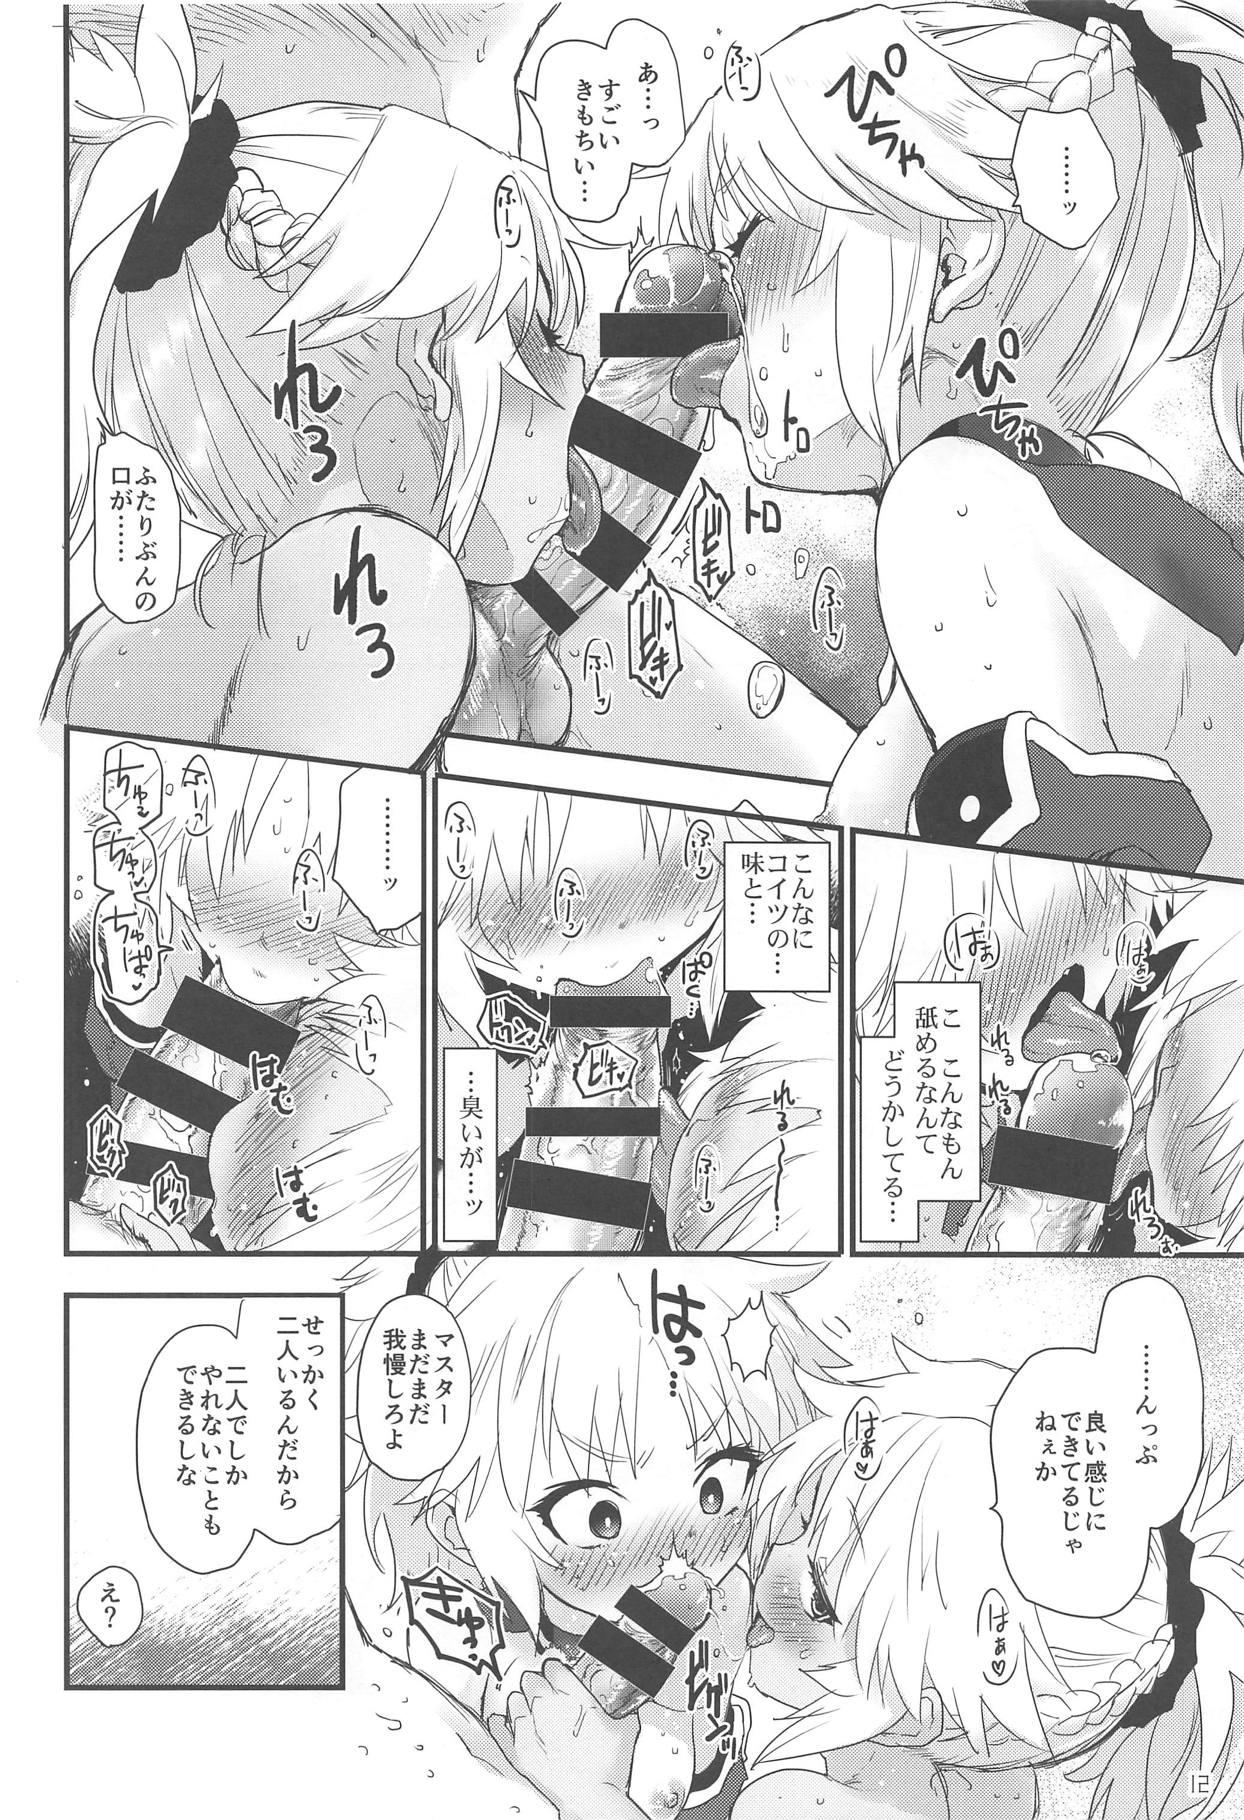 Fun Honeys - Fate grand order Pay - Page 11